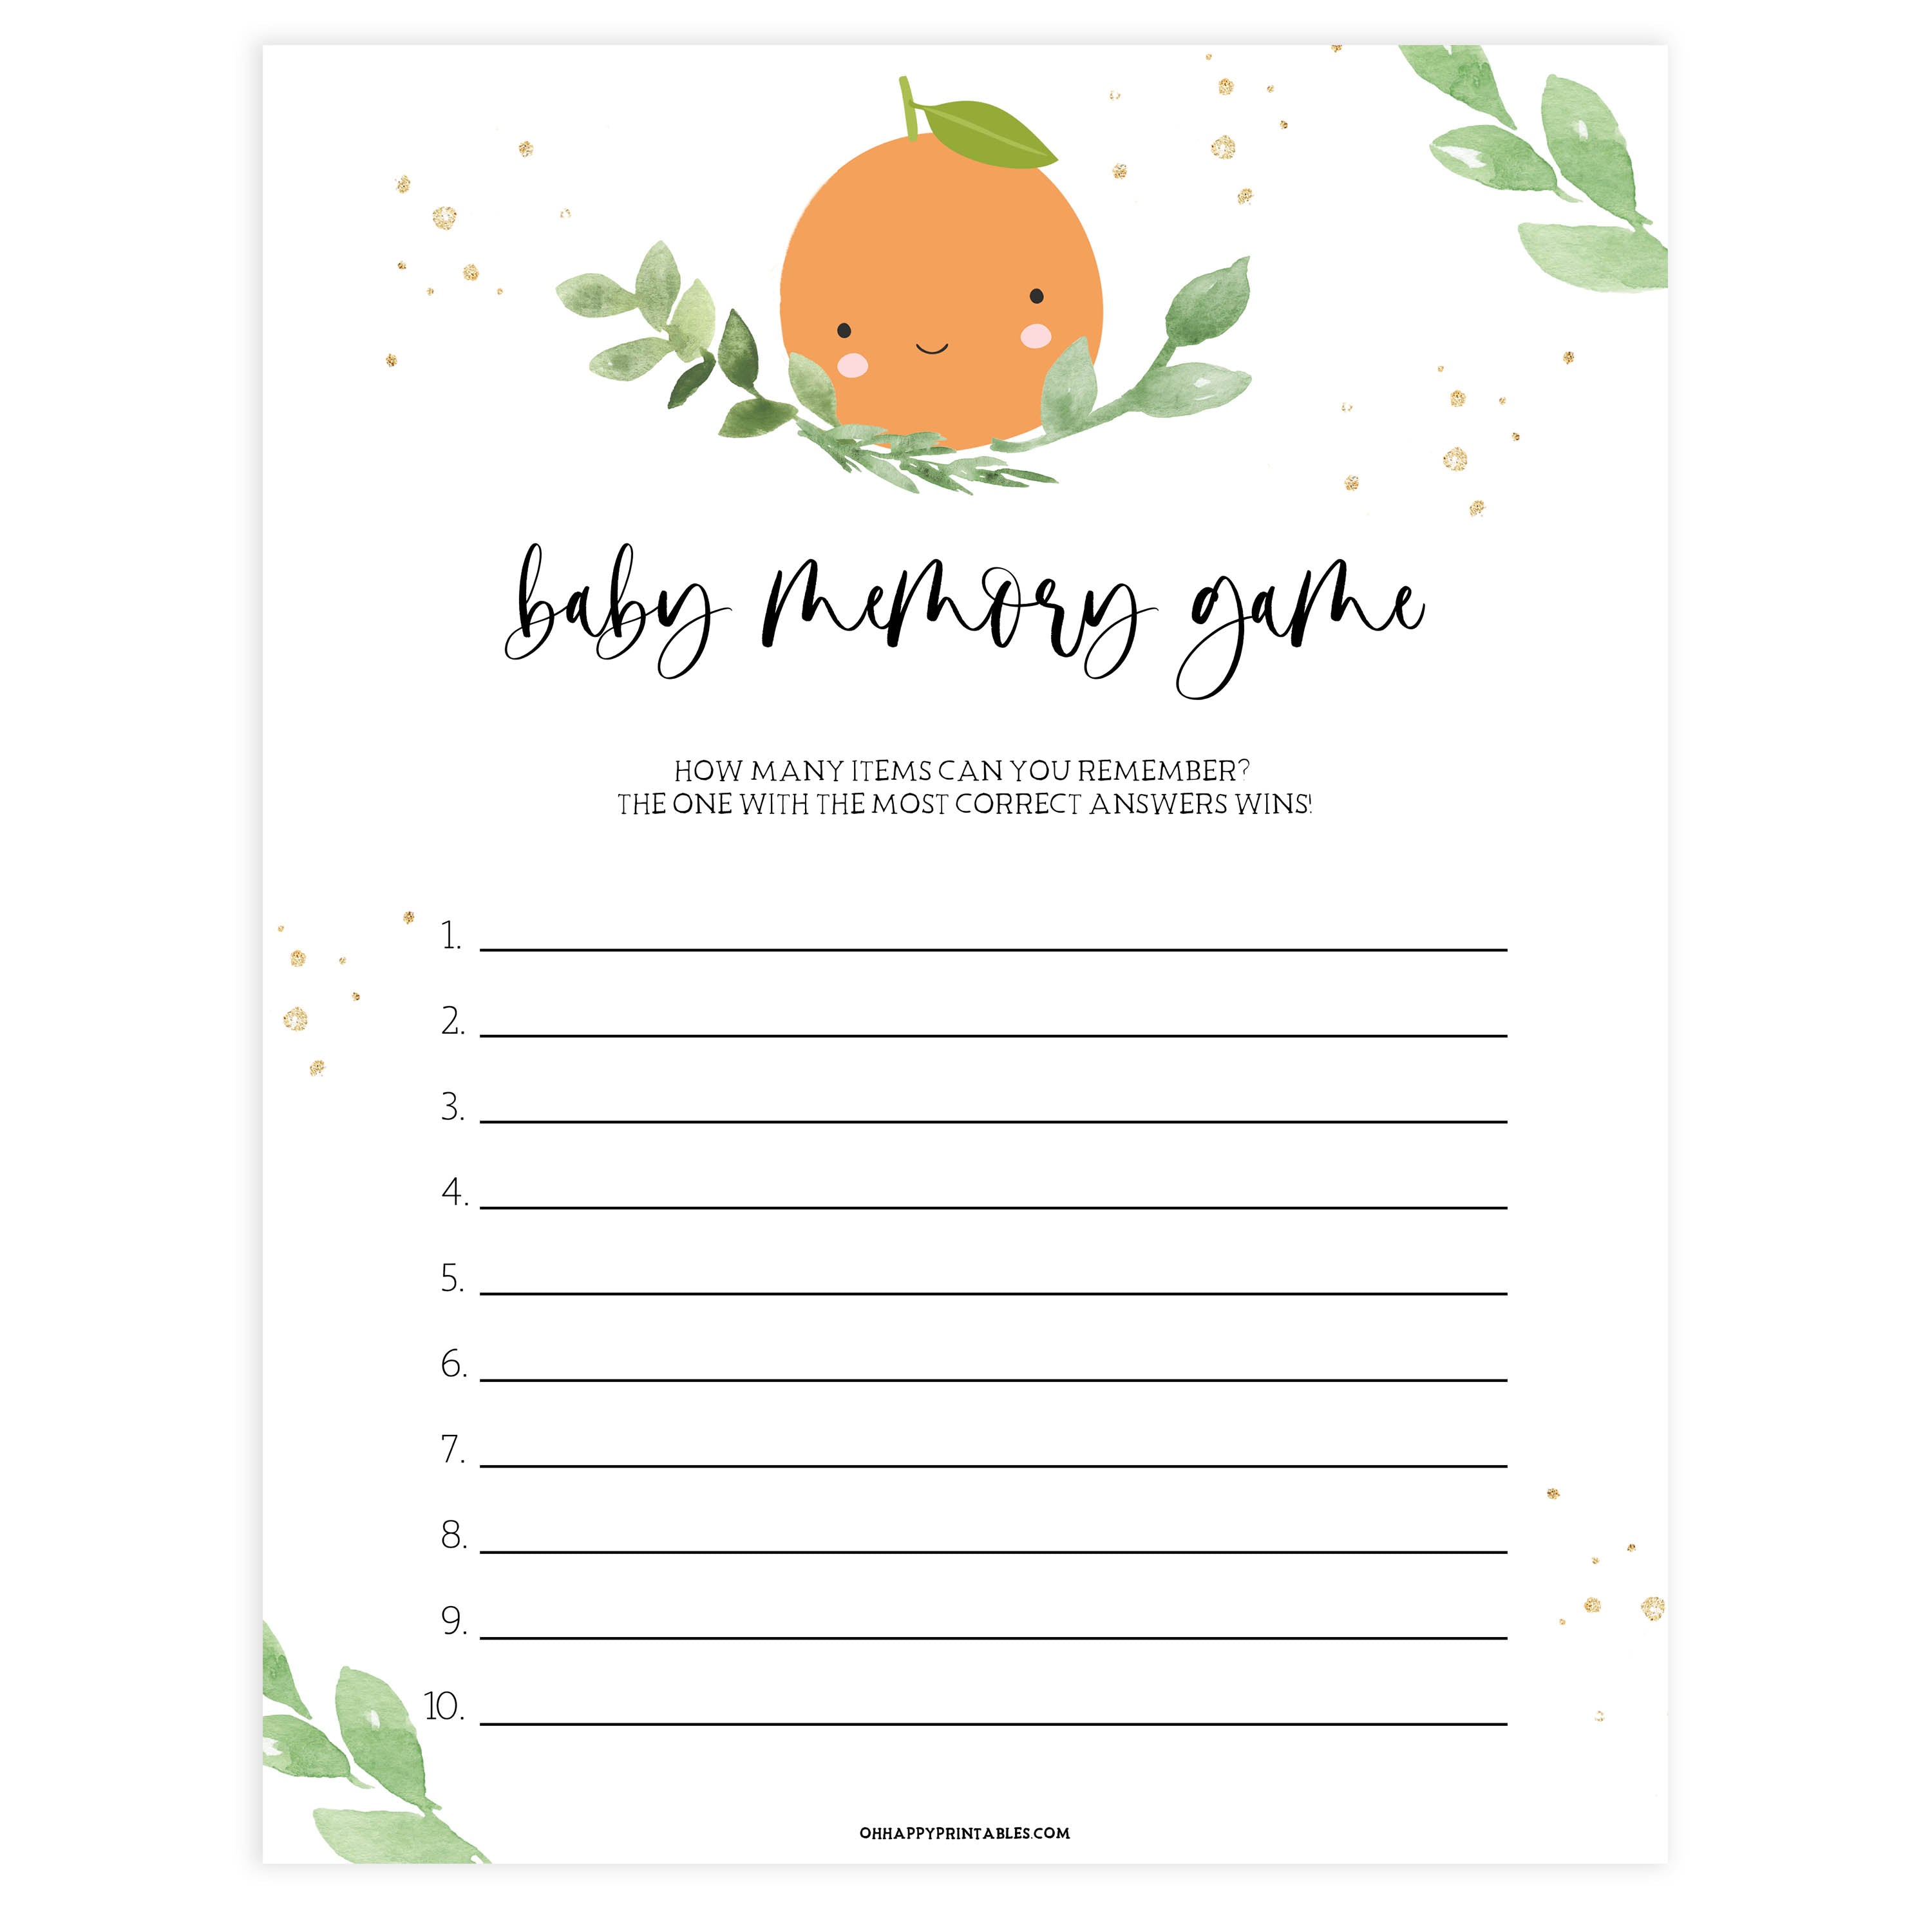 baby memory game, Printable baby shower games, little cutie baby games, baby shower games, fun baby shower ideas, top baby shower ideas, little cutie baby shower, baby shower games, fun little cutie baby shower ideas